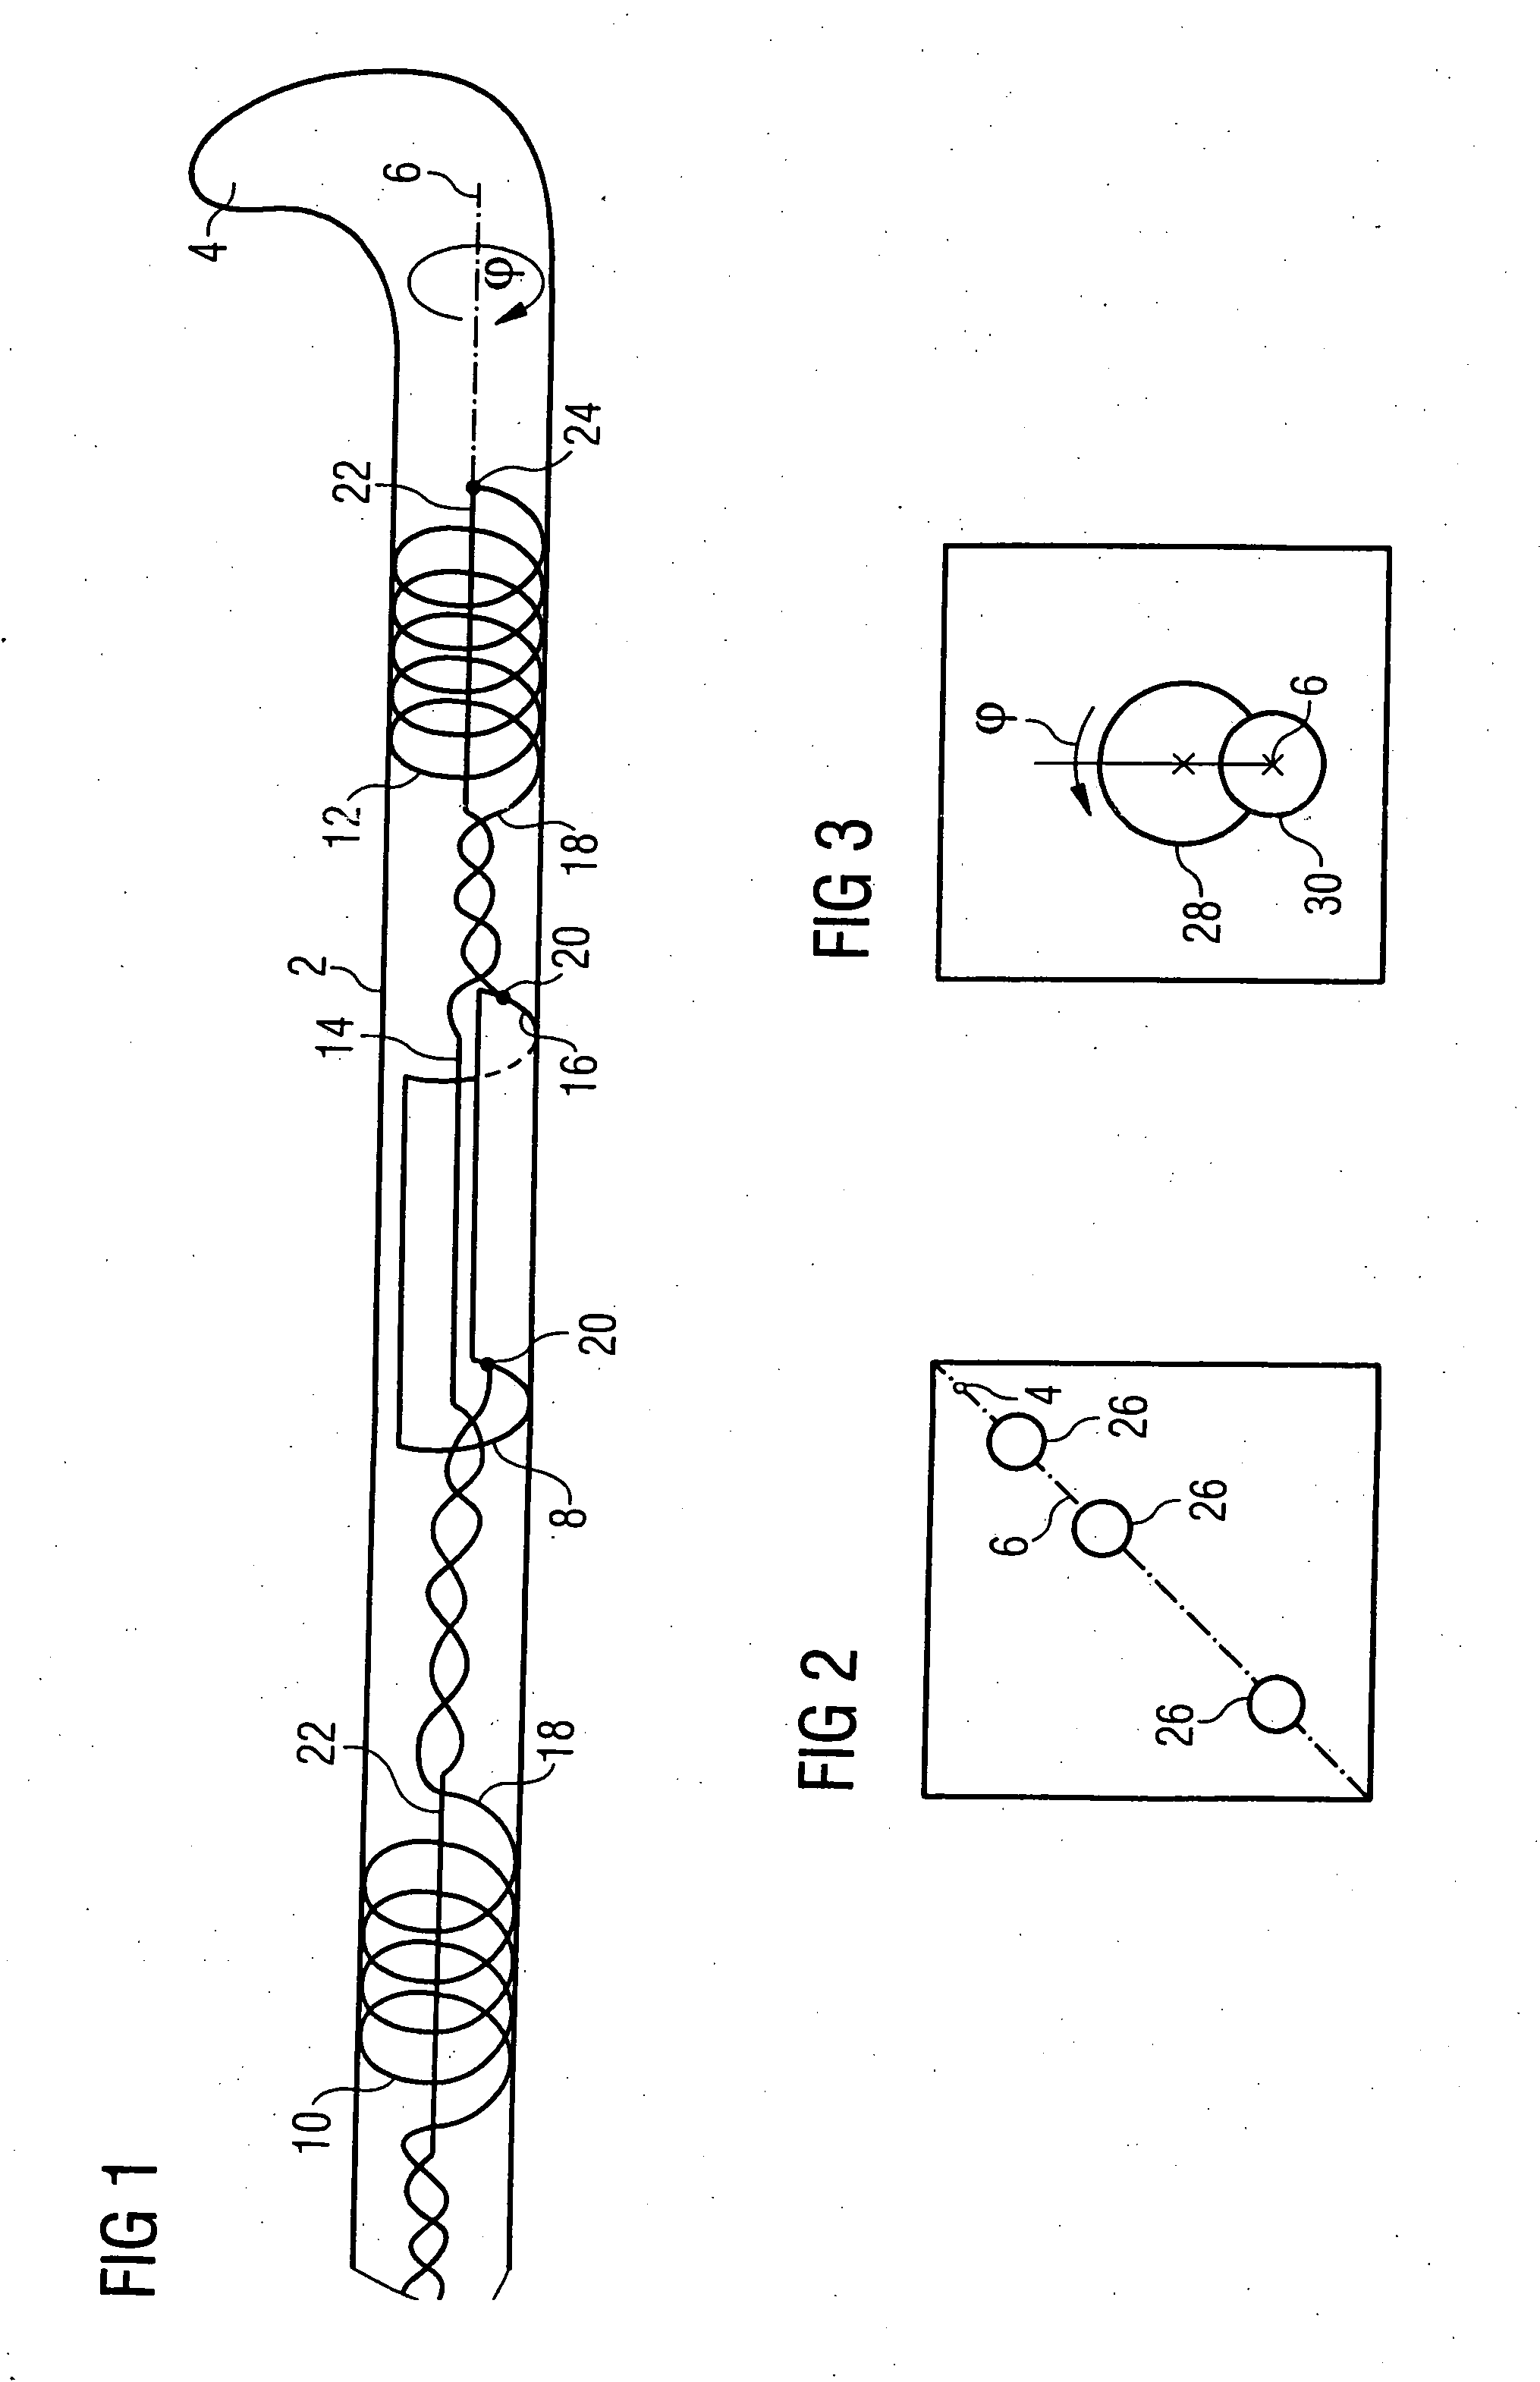 Method and apparatus for determining the azimuthal orientation of a medical instrument from MR signals